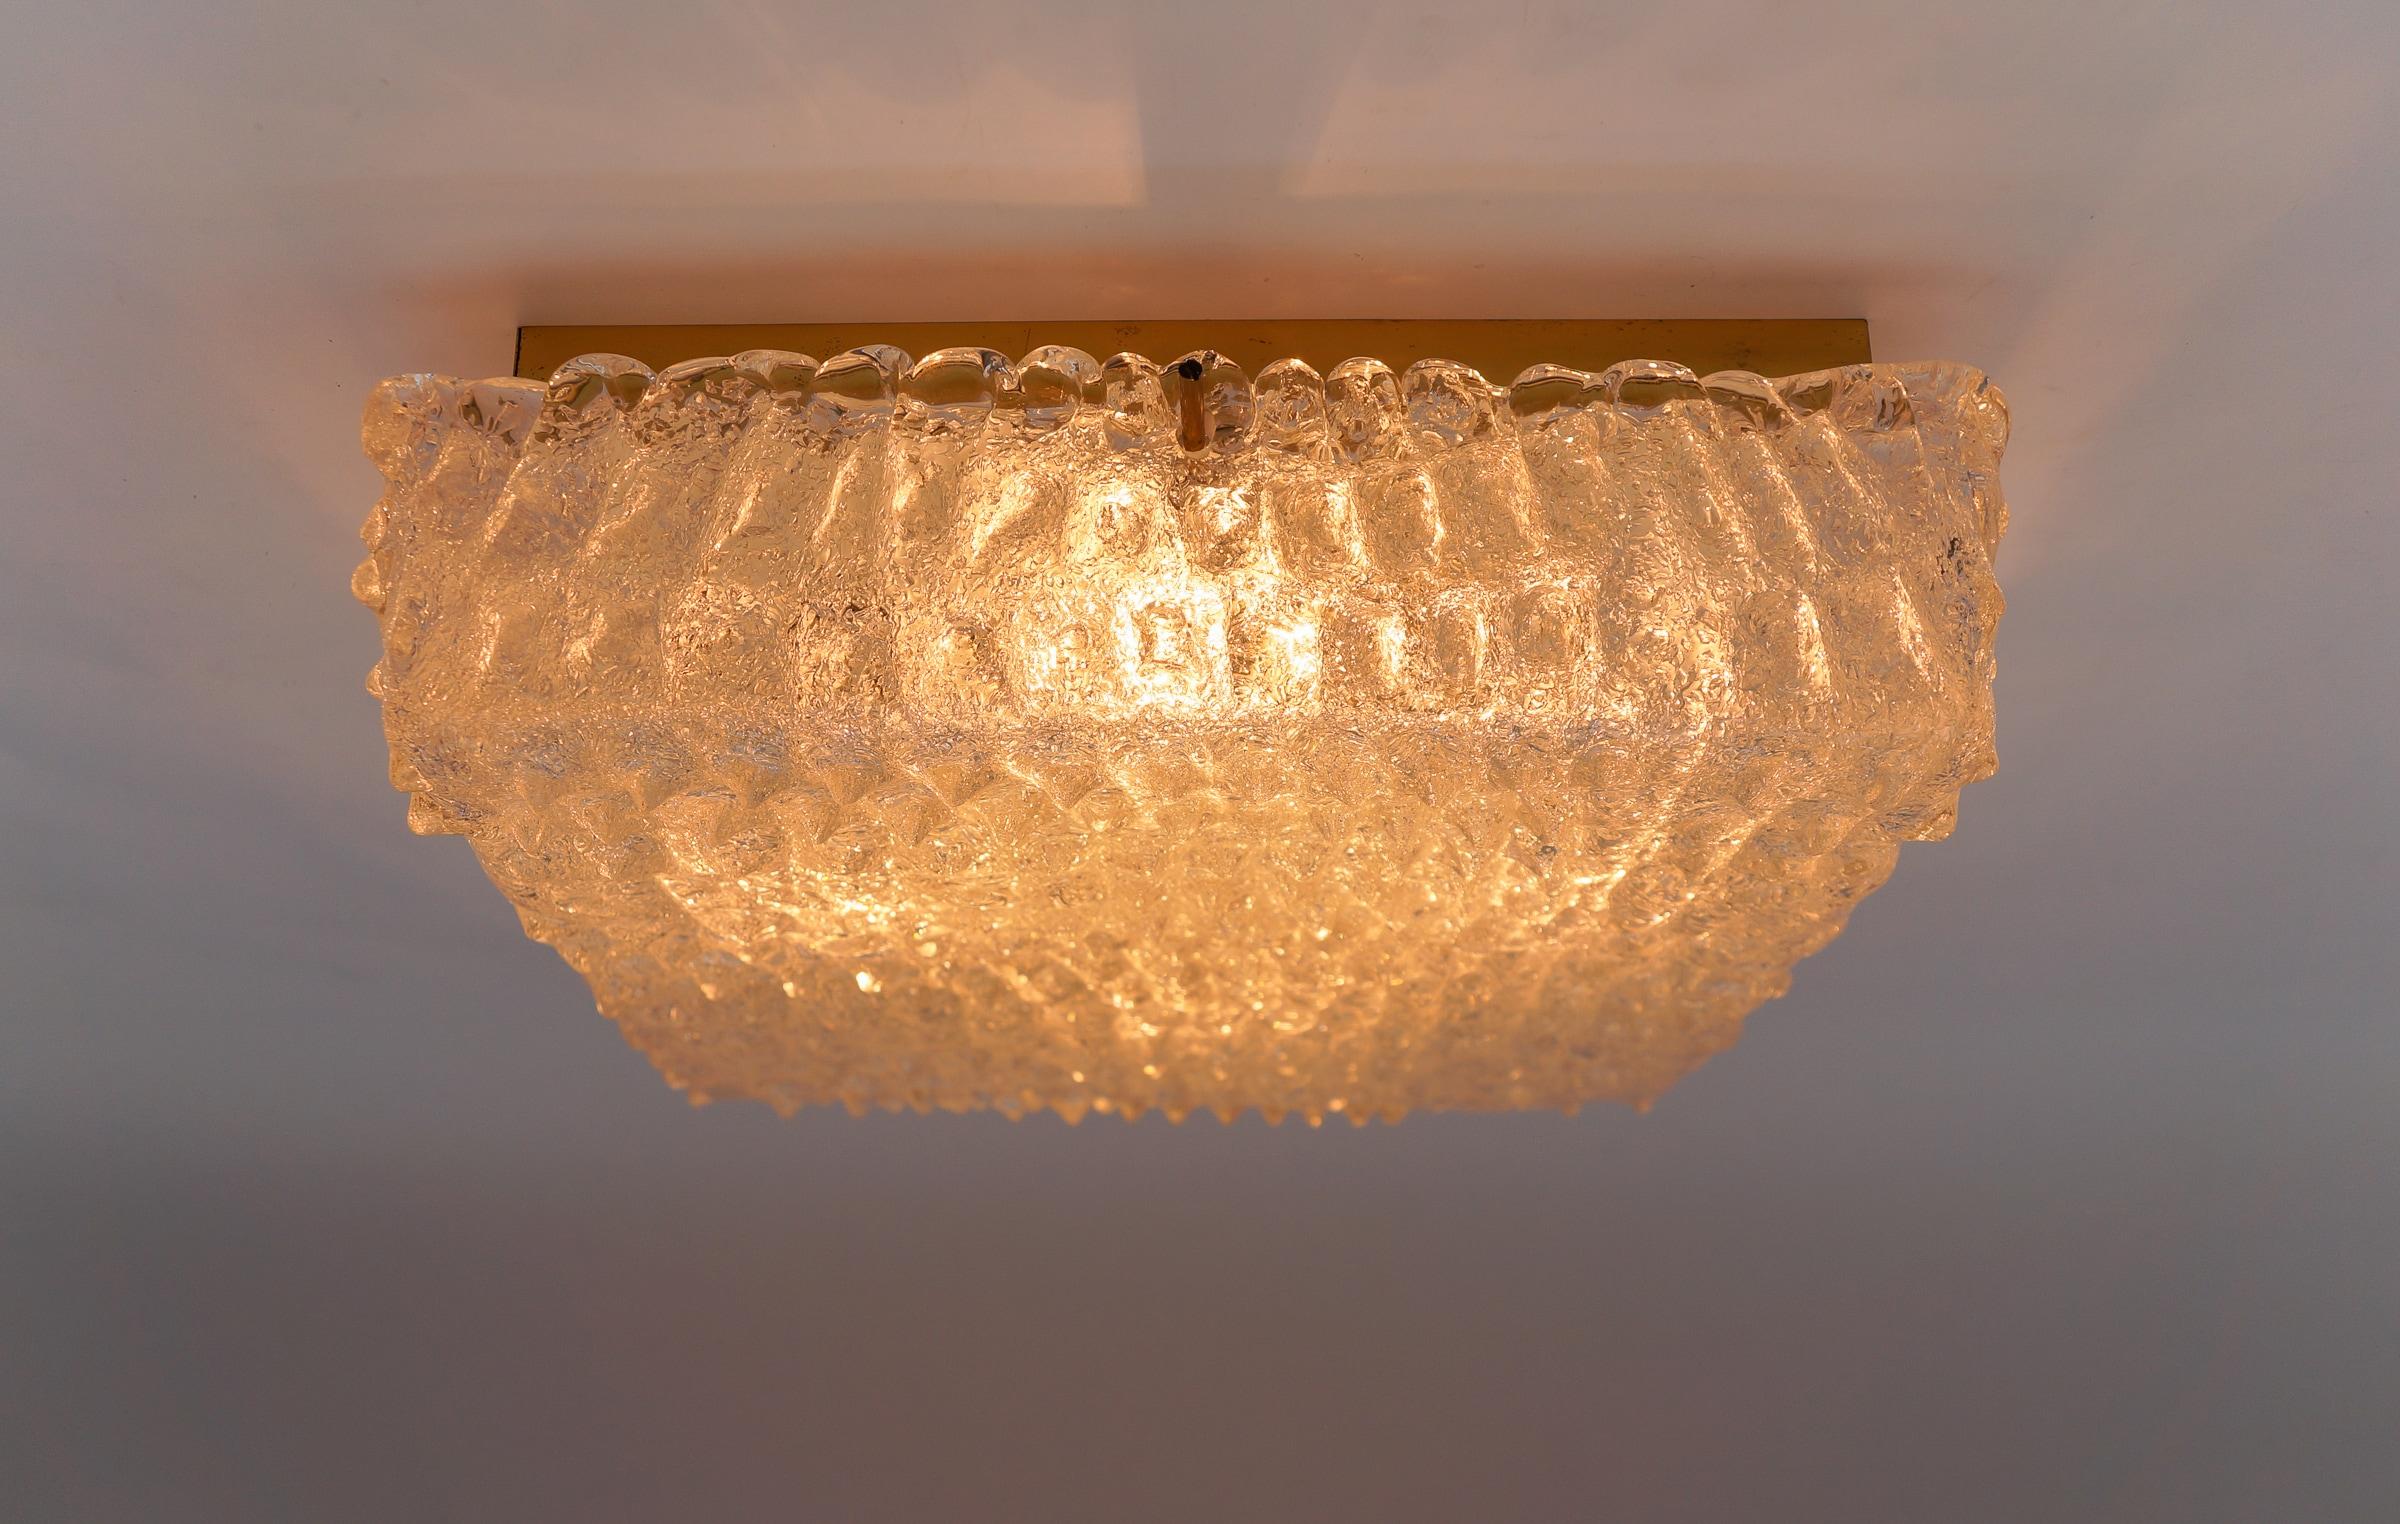 Stunning Murano Glass Flush Mount Lamp with Crocodile Skin Surface Texture by Hillebrand 1960s, Germany

The lamp is executed with 5x E14 Edison screw fit bulbs. It is wired and in working condition. It runs both on 110 / 230 volt.

Our lamps are